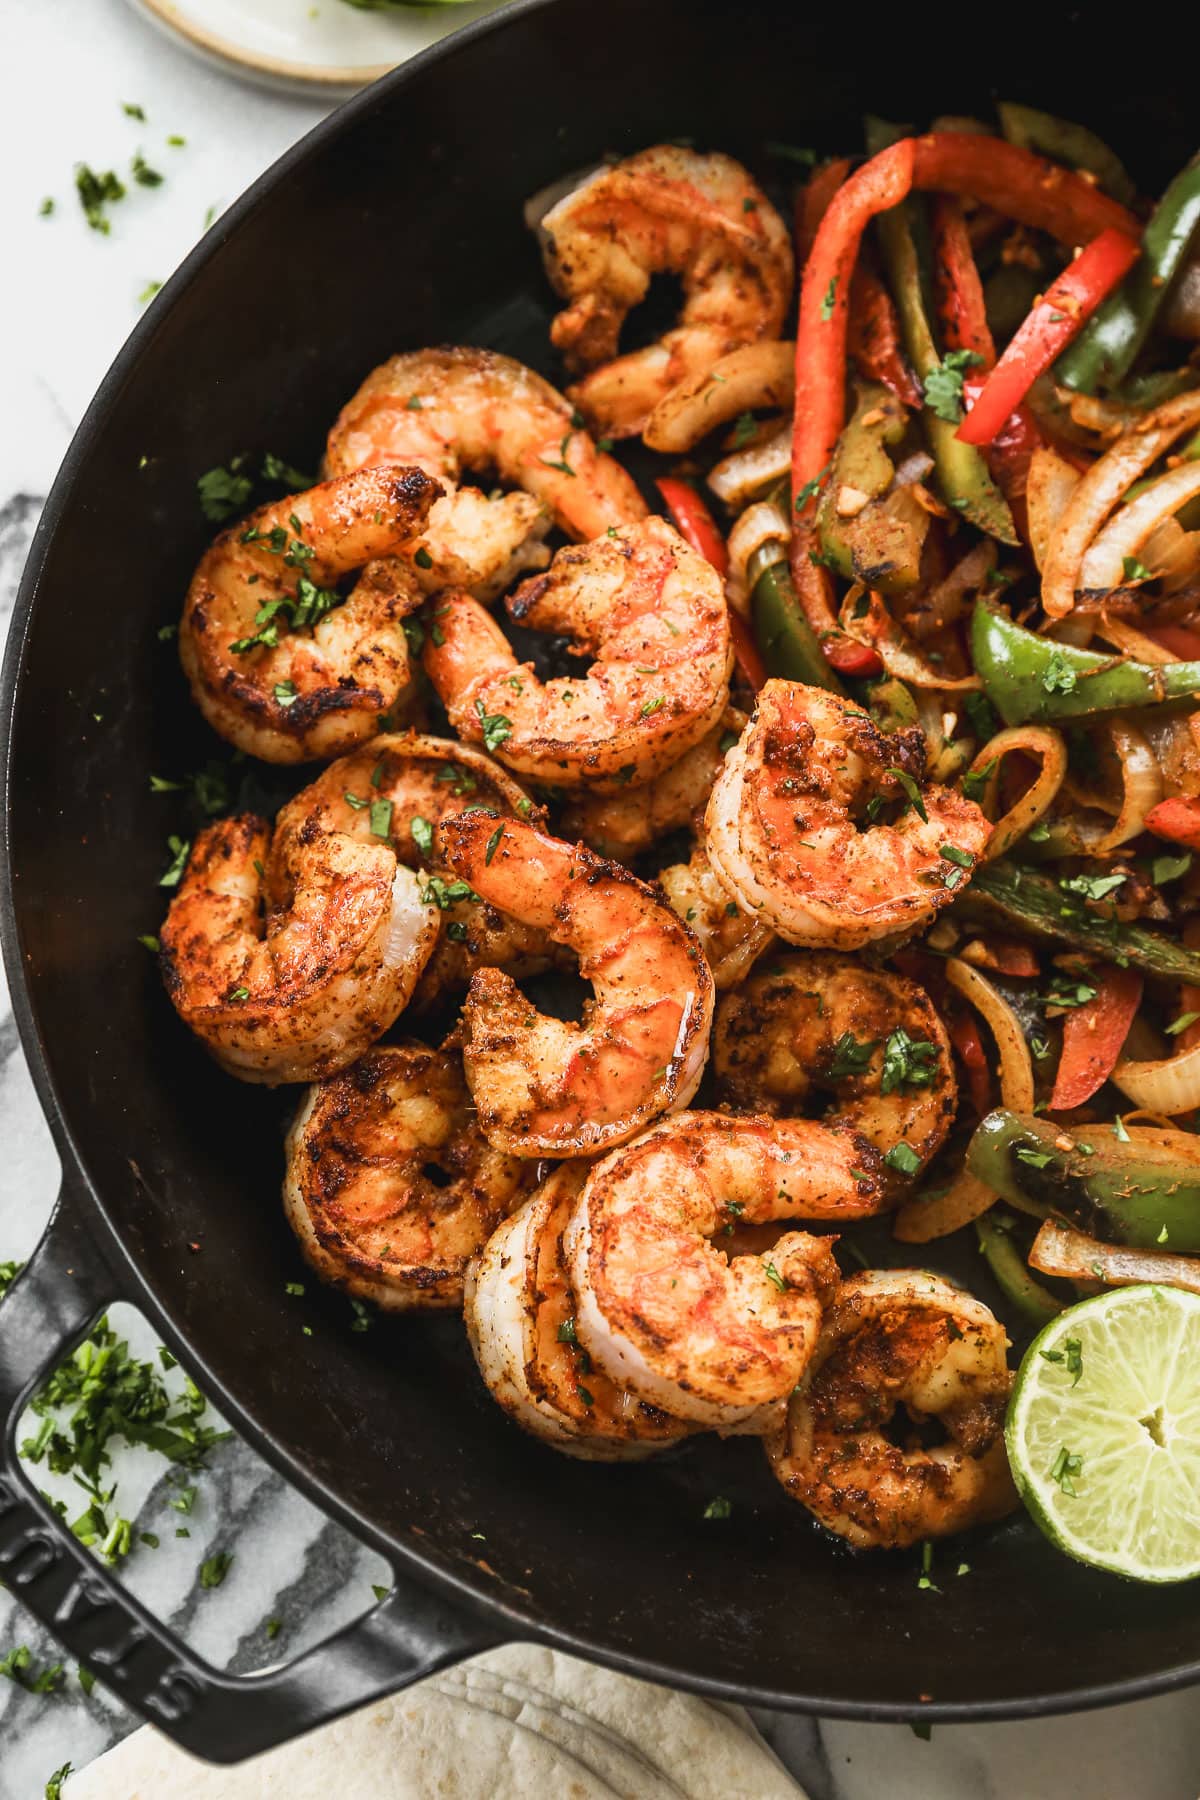 These Shrimp Fajitas Are Done in Just 25 Minutes!